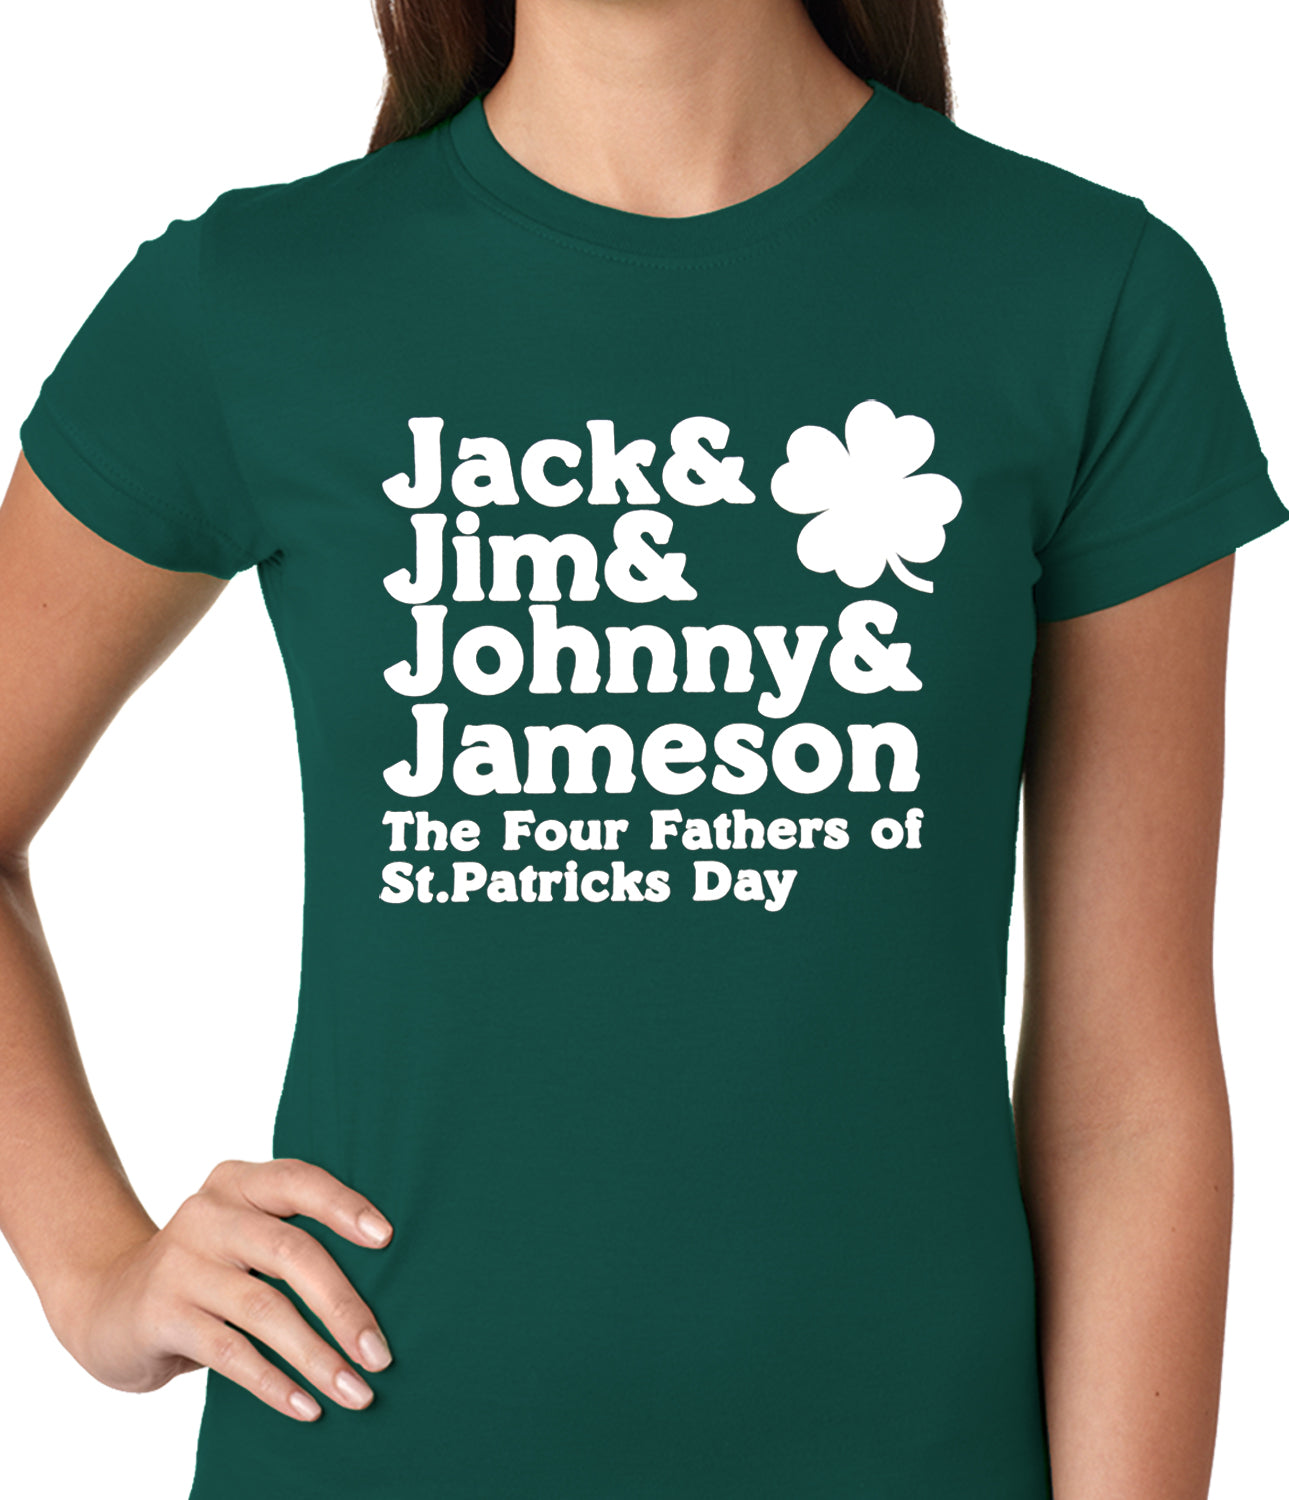 The Four Fathers of St. Patrick's Day Girls T-shirt